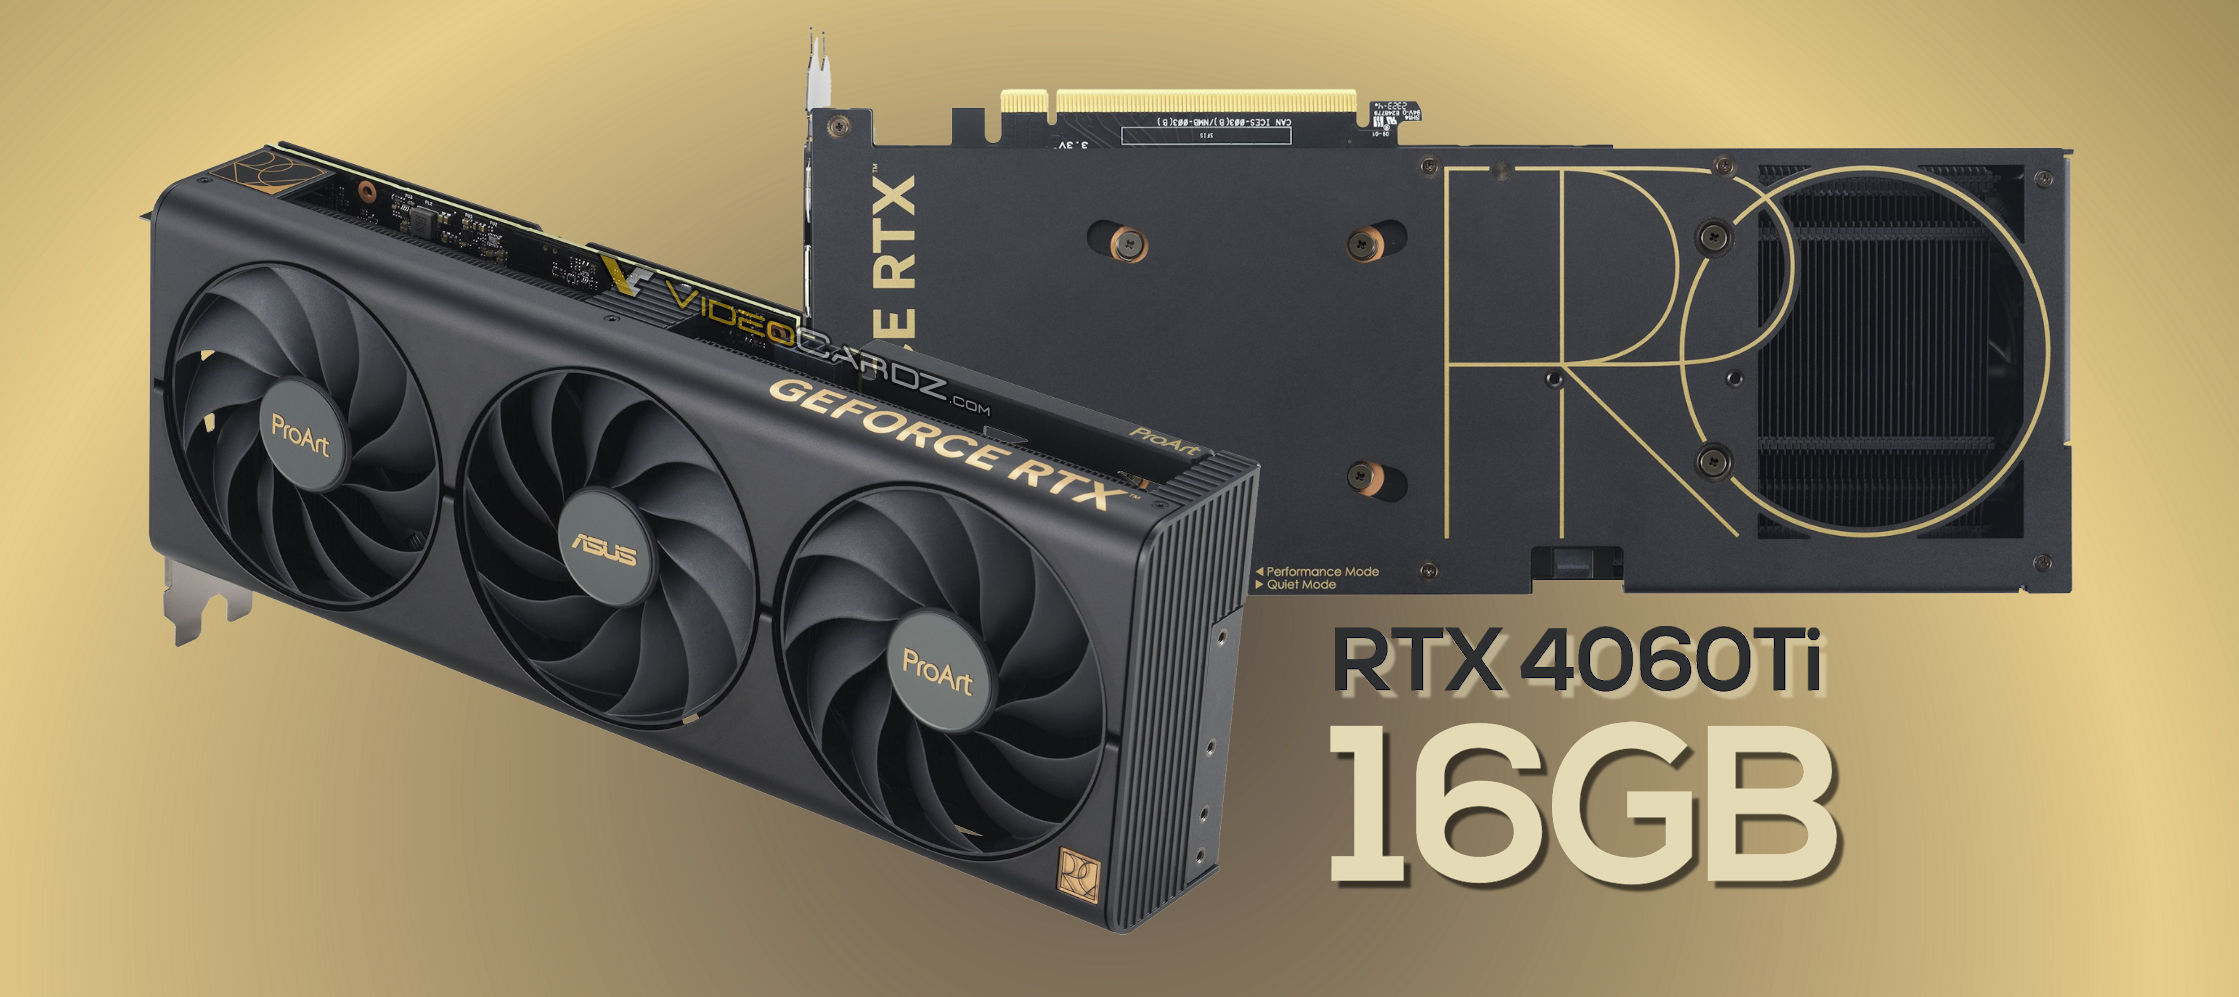 ASUS launches PROART RTX 4060 Ti series with 16GB VRAM 